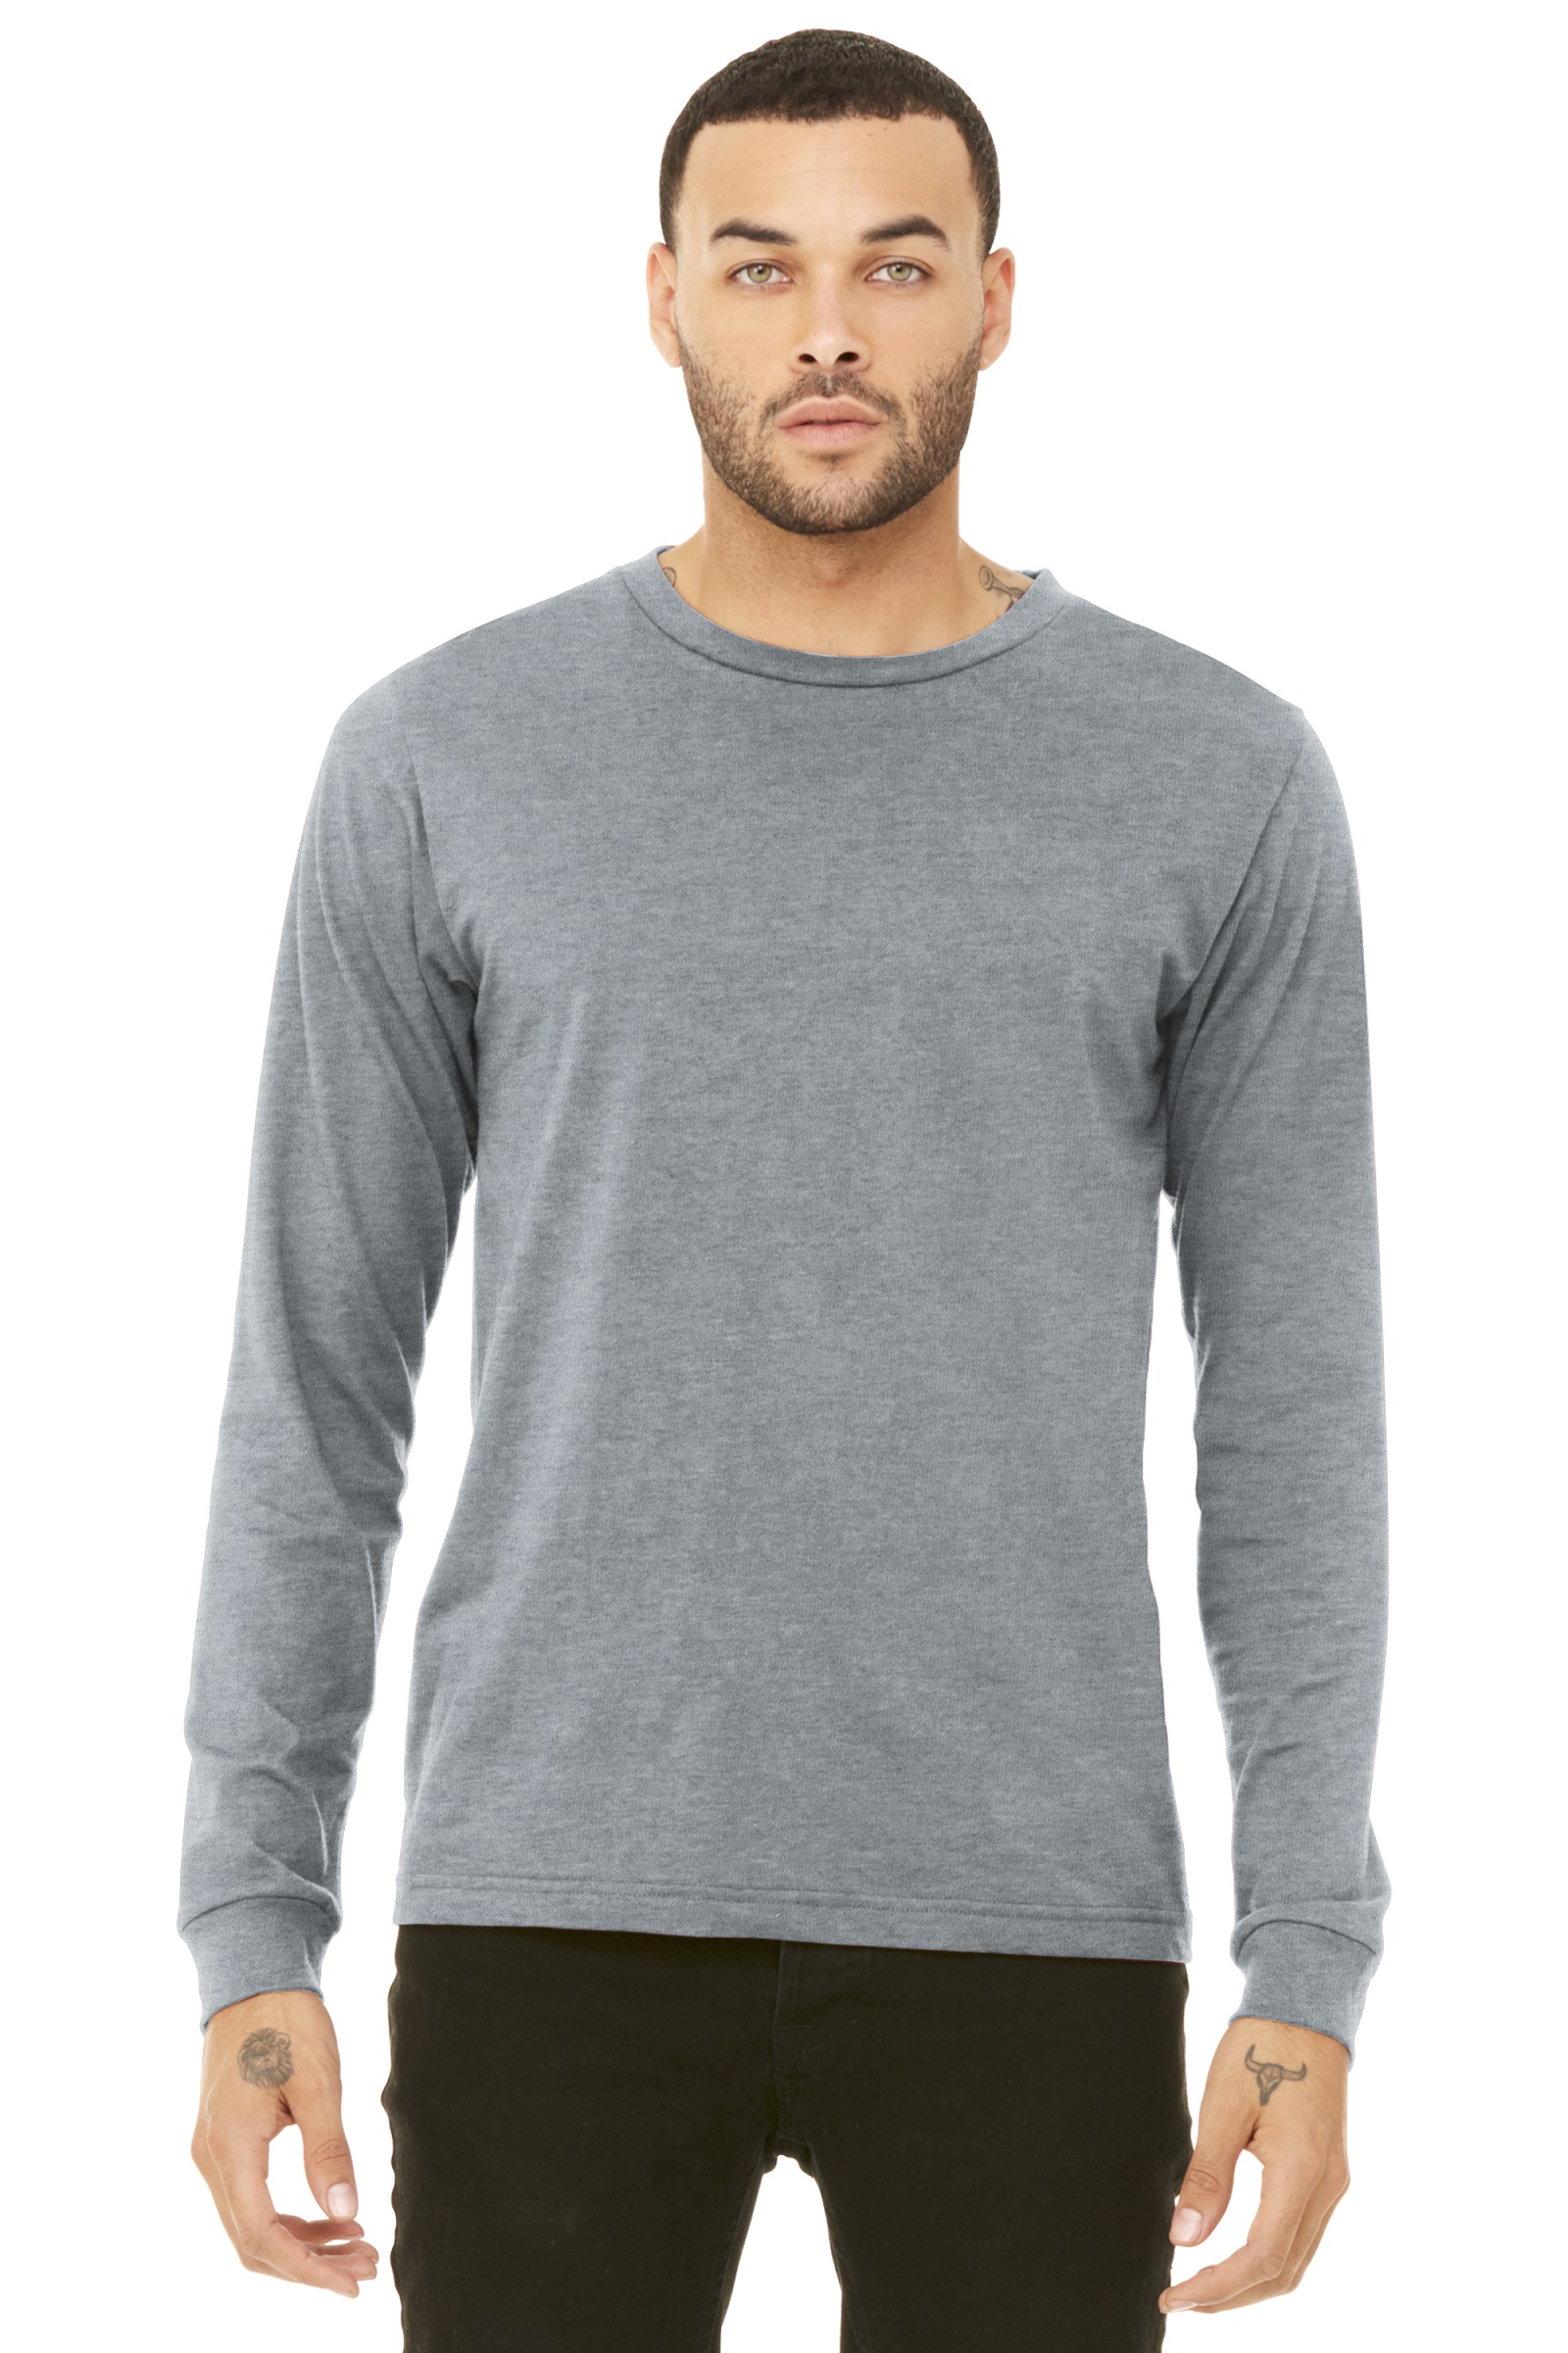 Bella+Canvas Embroidered Men's Long Sleeve Tee